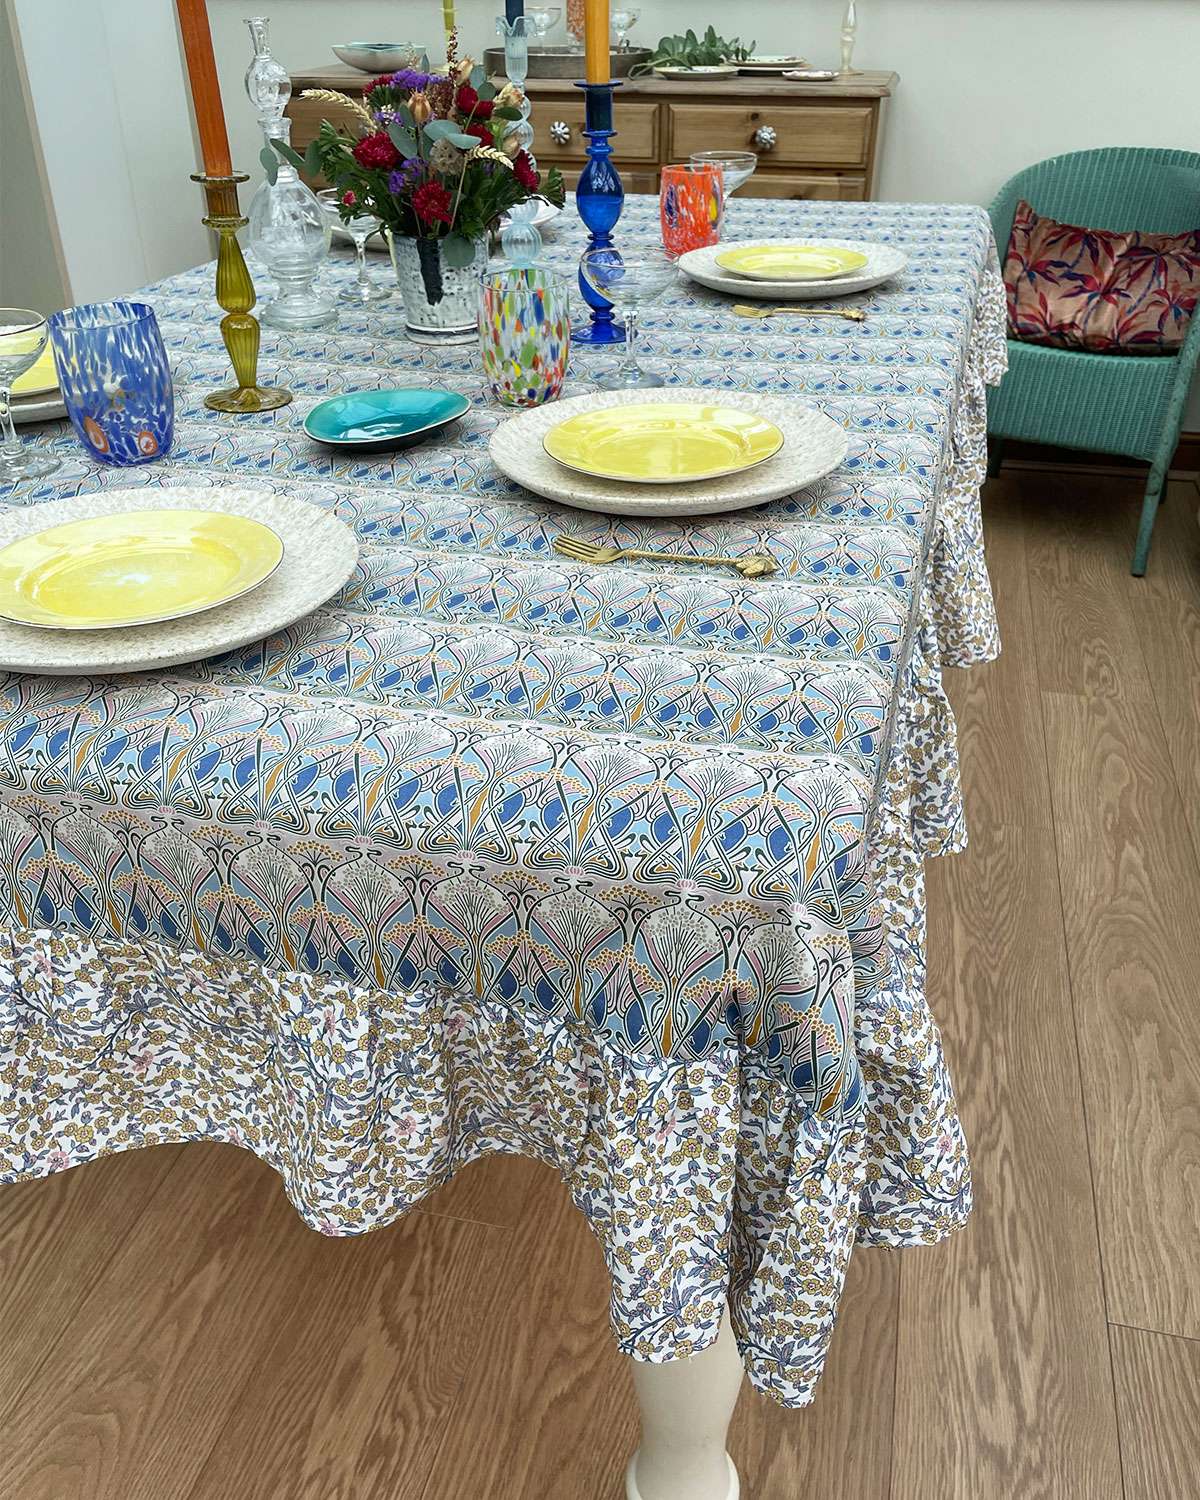 How To… Make a Tablecloth with a Ruffle Trim